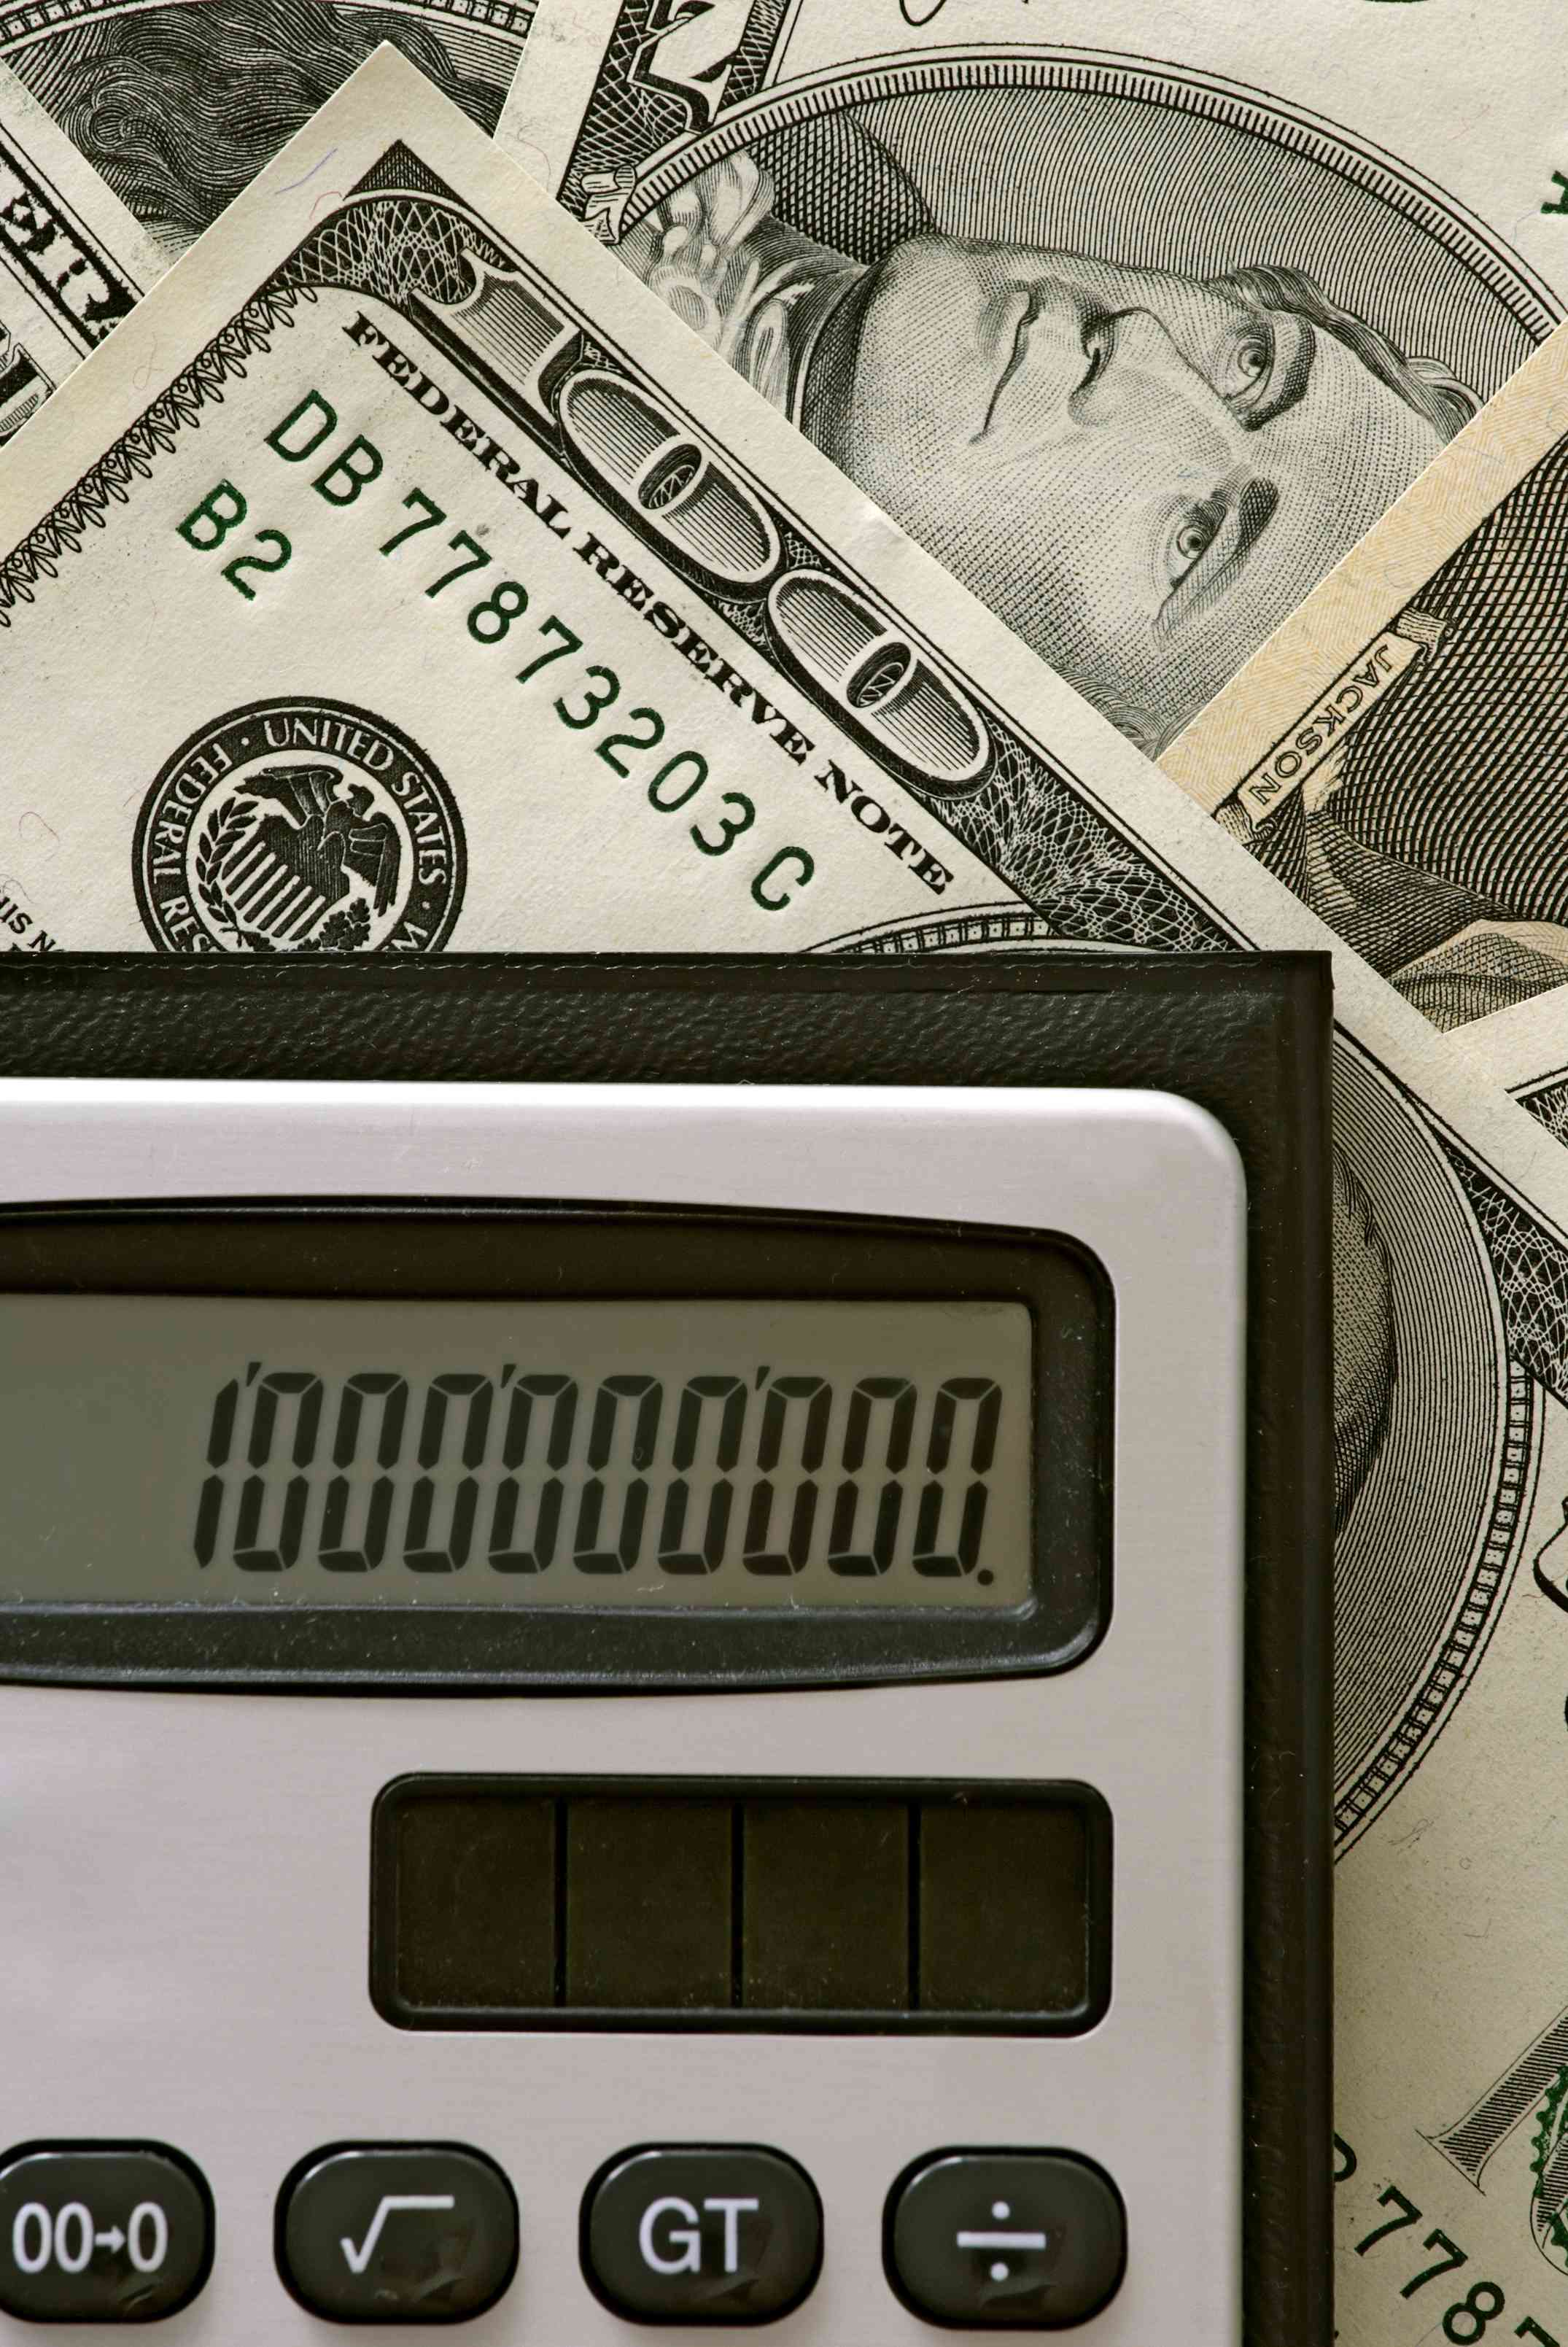 United States dollars and a calculator showing 1,000,000,000.